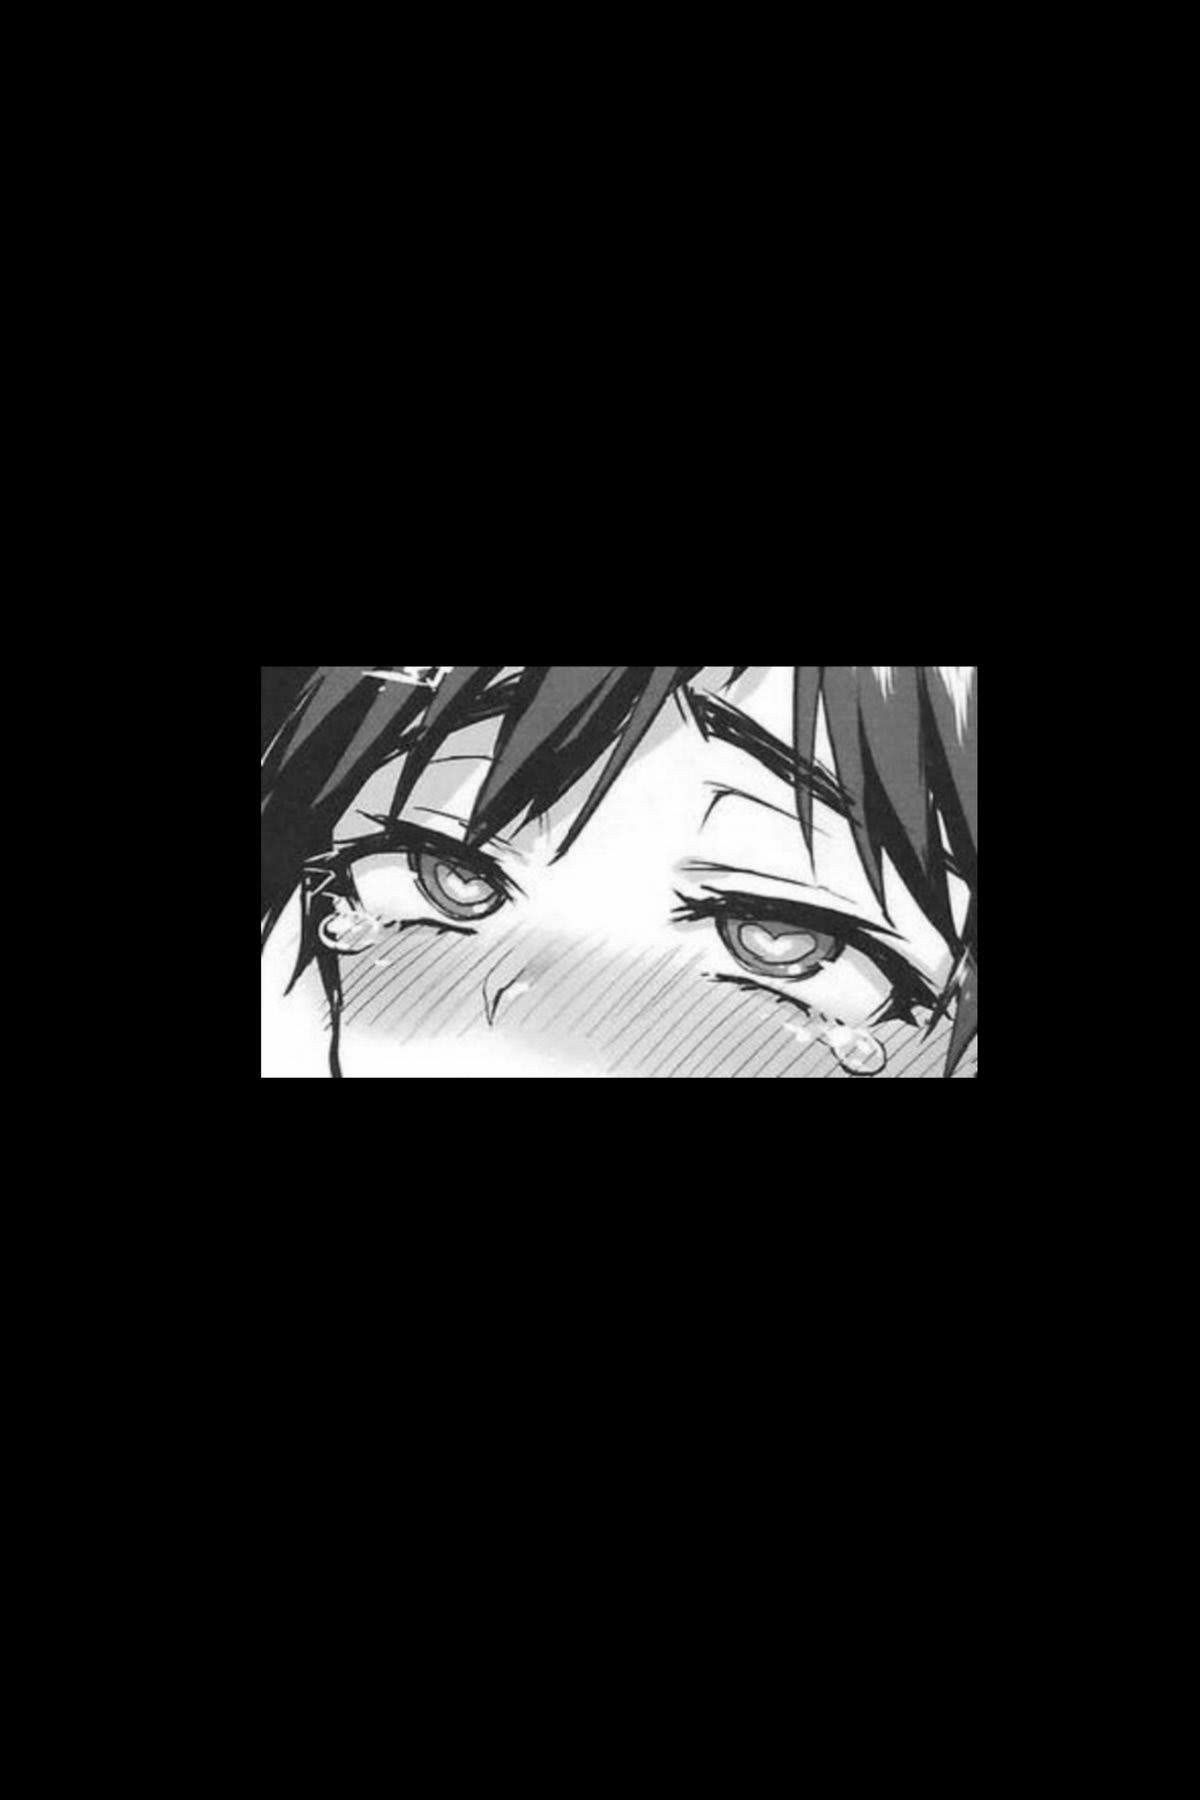 A black and white manga panel of a close-up of a girl's face. Her eyes are closed and she has a tear rolling down her cheek. - Dark anime